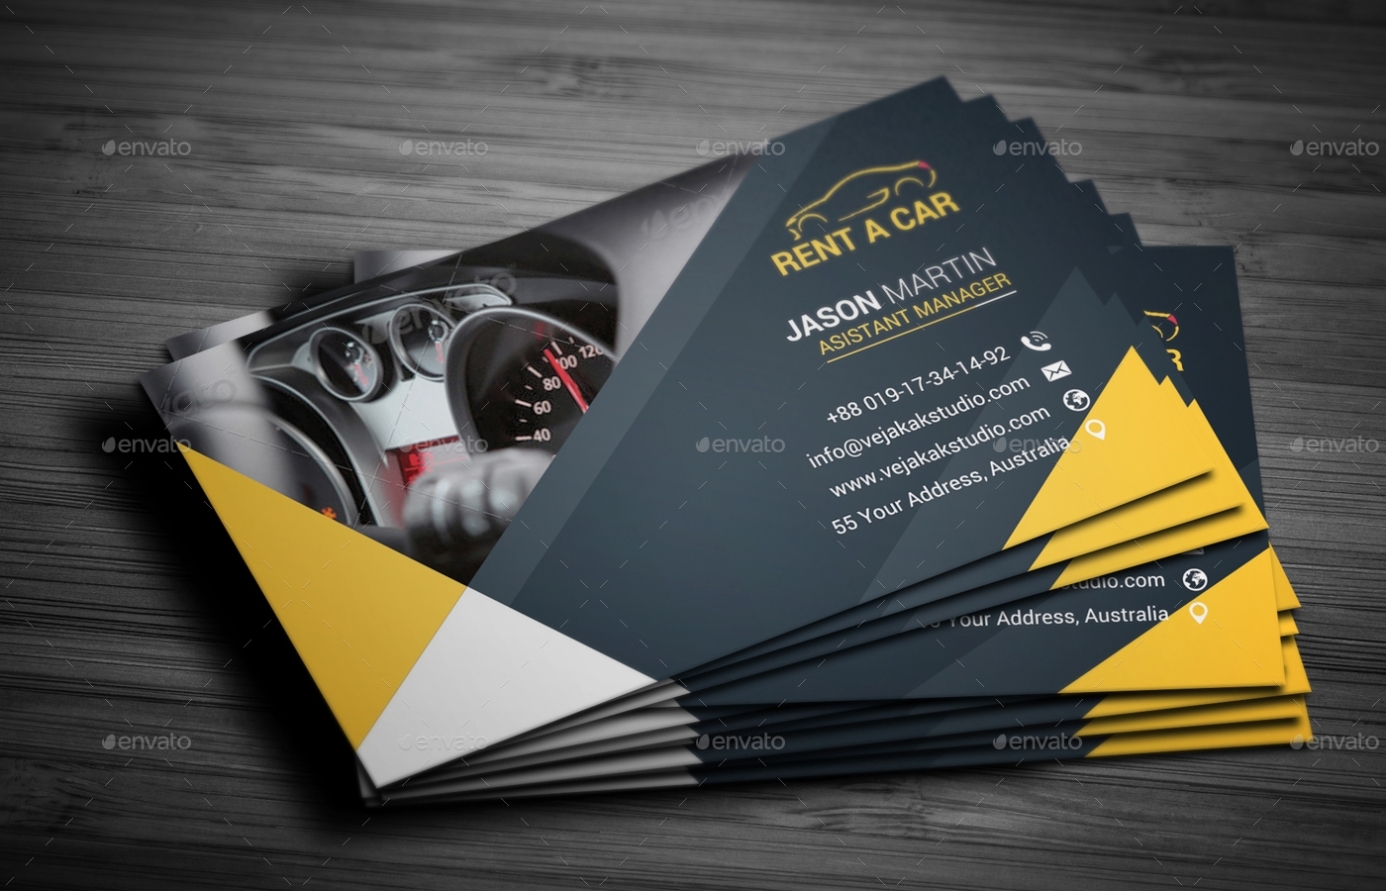 Rent A Car Business Card By Vejakakstudio | Graphicriver with Automotive Business Card Templates